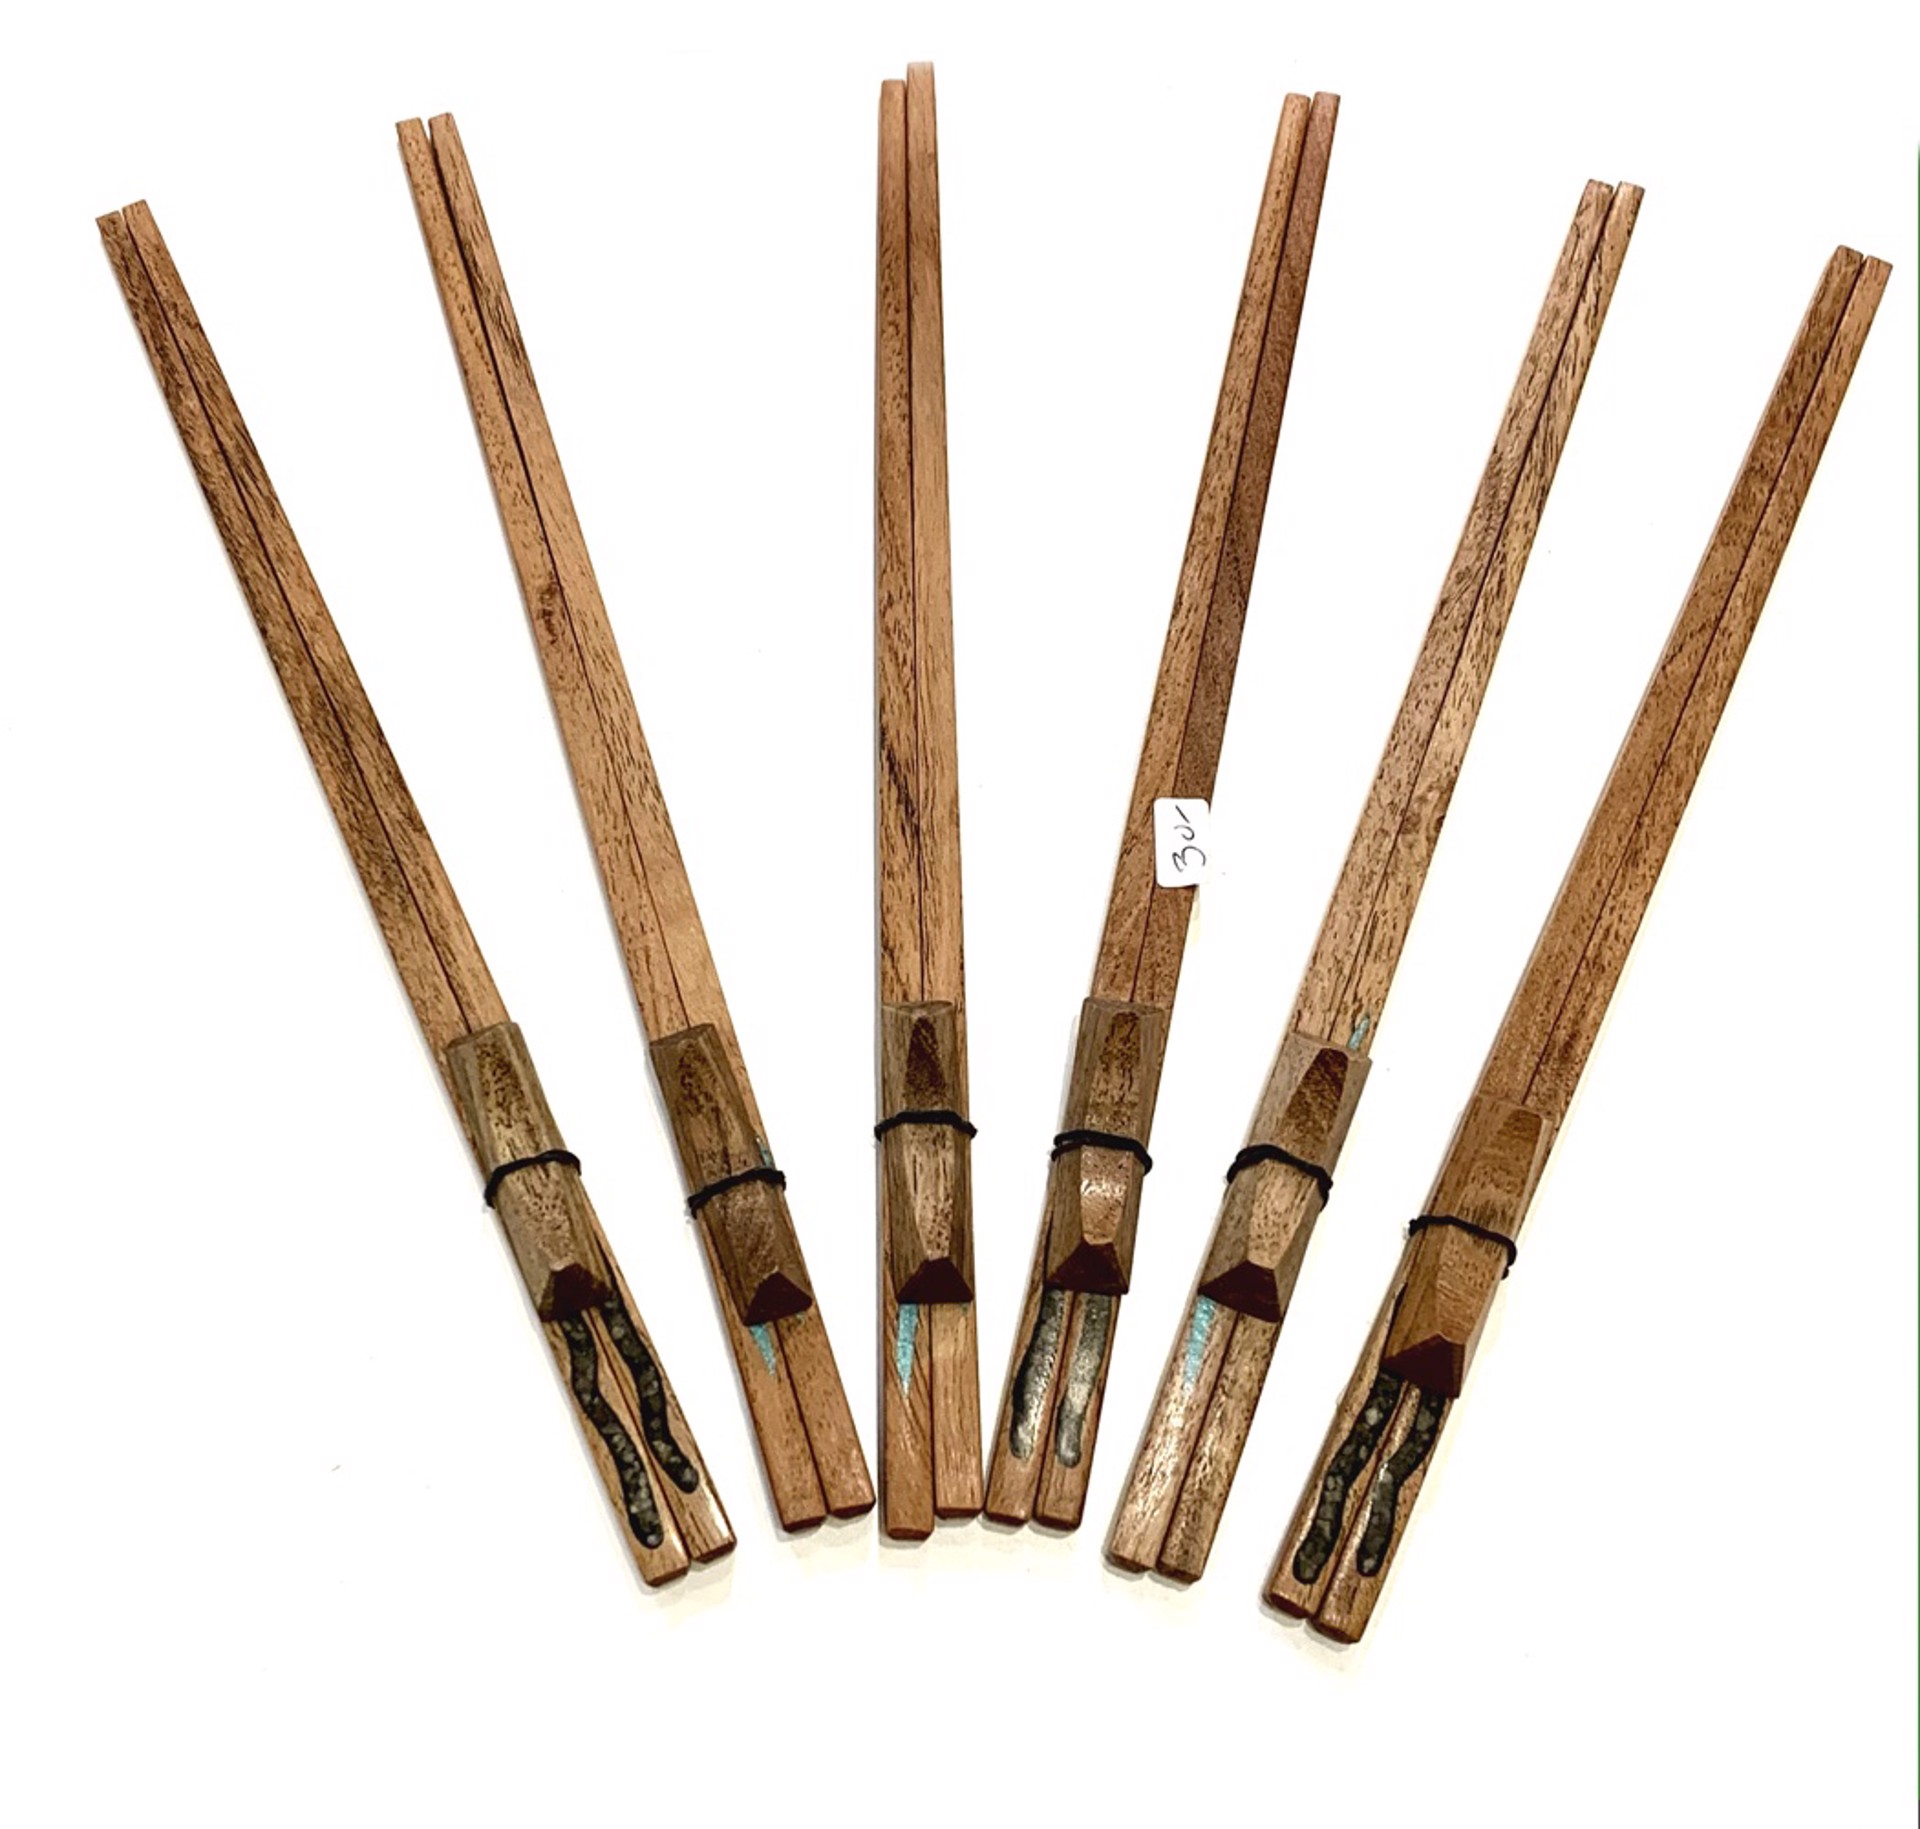 Utensils - Chopsticks with Rest, Mesquite with Inlay, Assorted by TreeStump Woodcraft